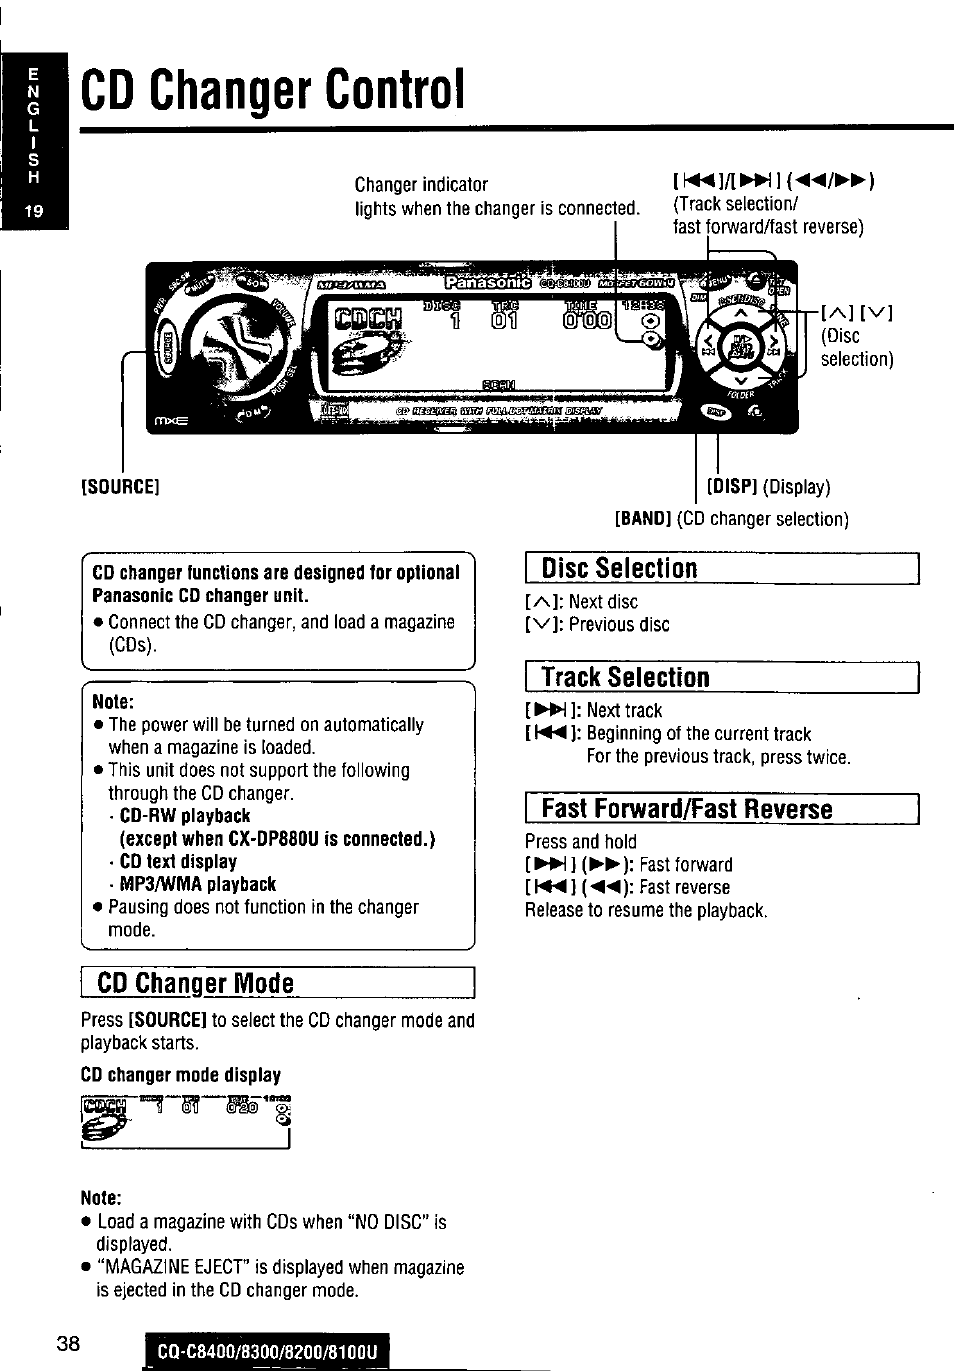 Cd changer control, Cd changer mode, Disc selection | Track selection, Fast forward/fast reverse | Panasonic CQ-C8300U User Manual | Page 38 / 176